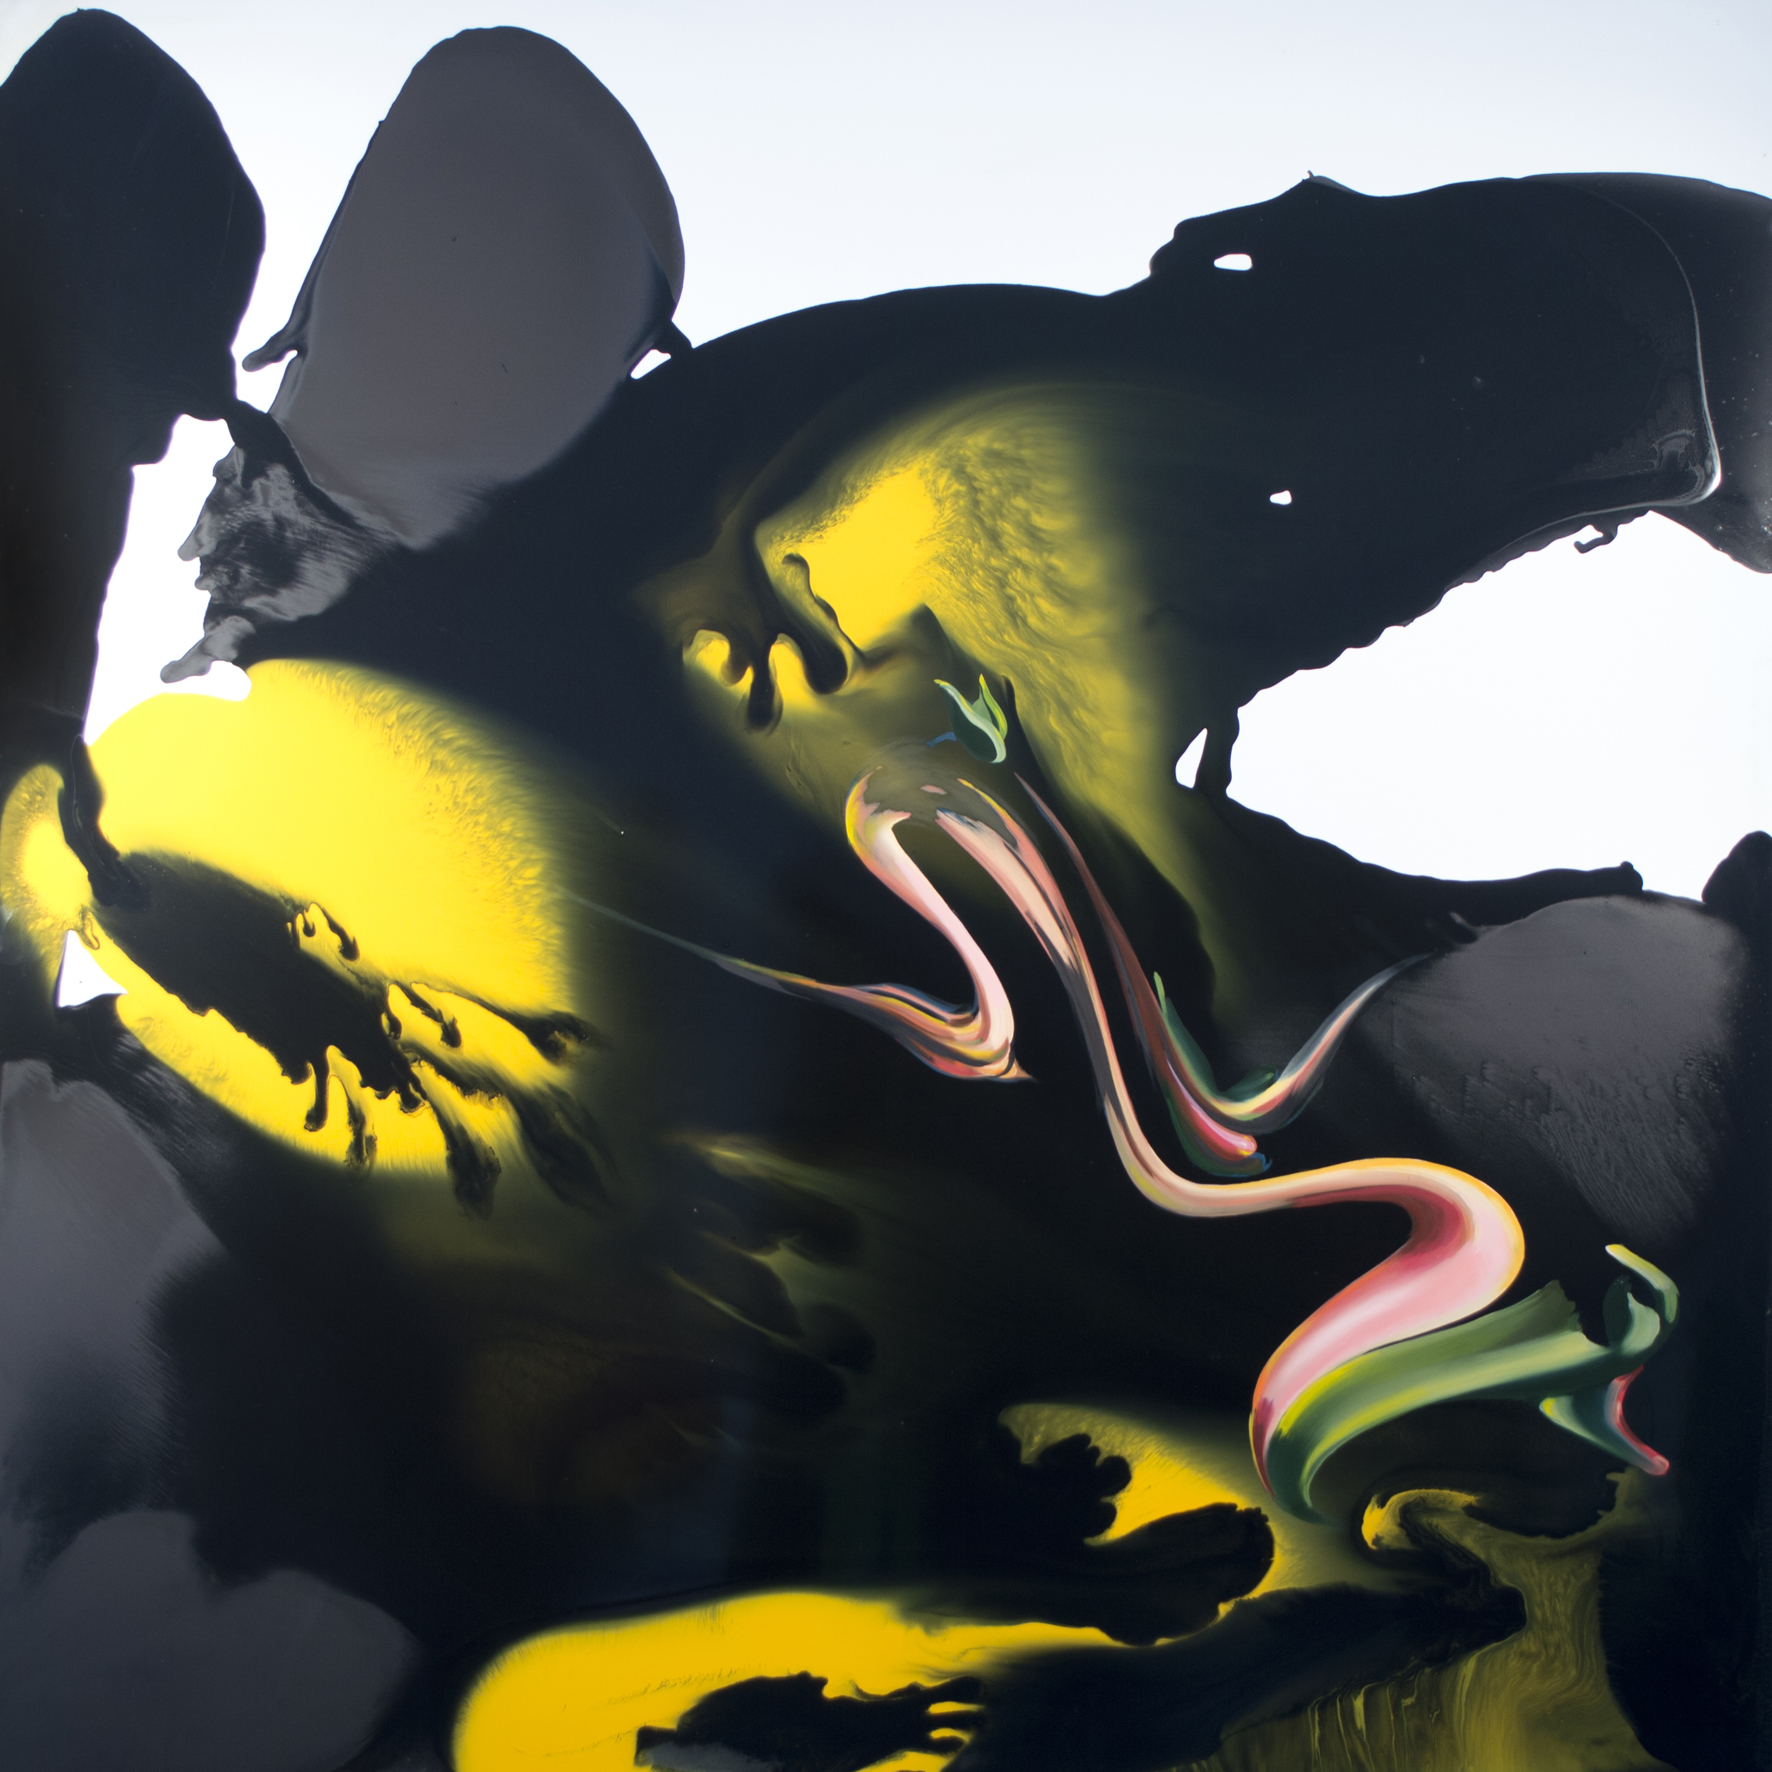 The Spill Suite (Yellow versus Black), 2016.